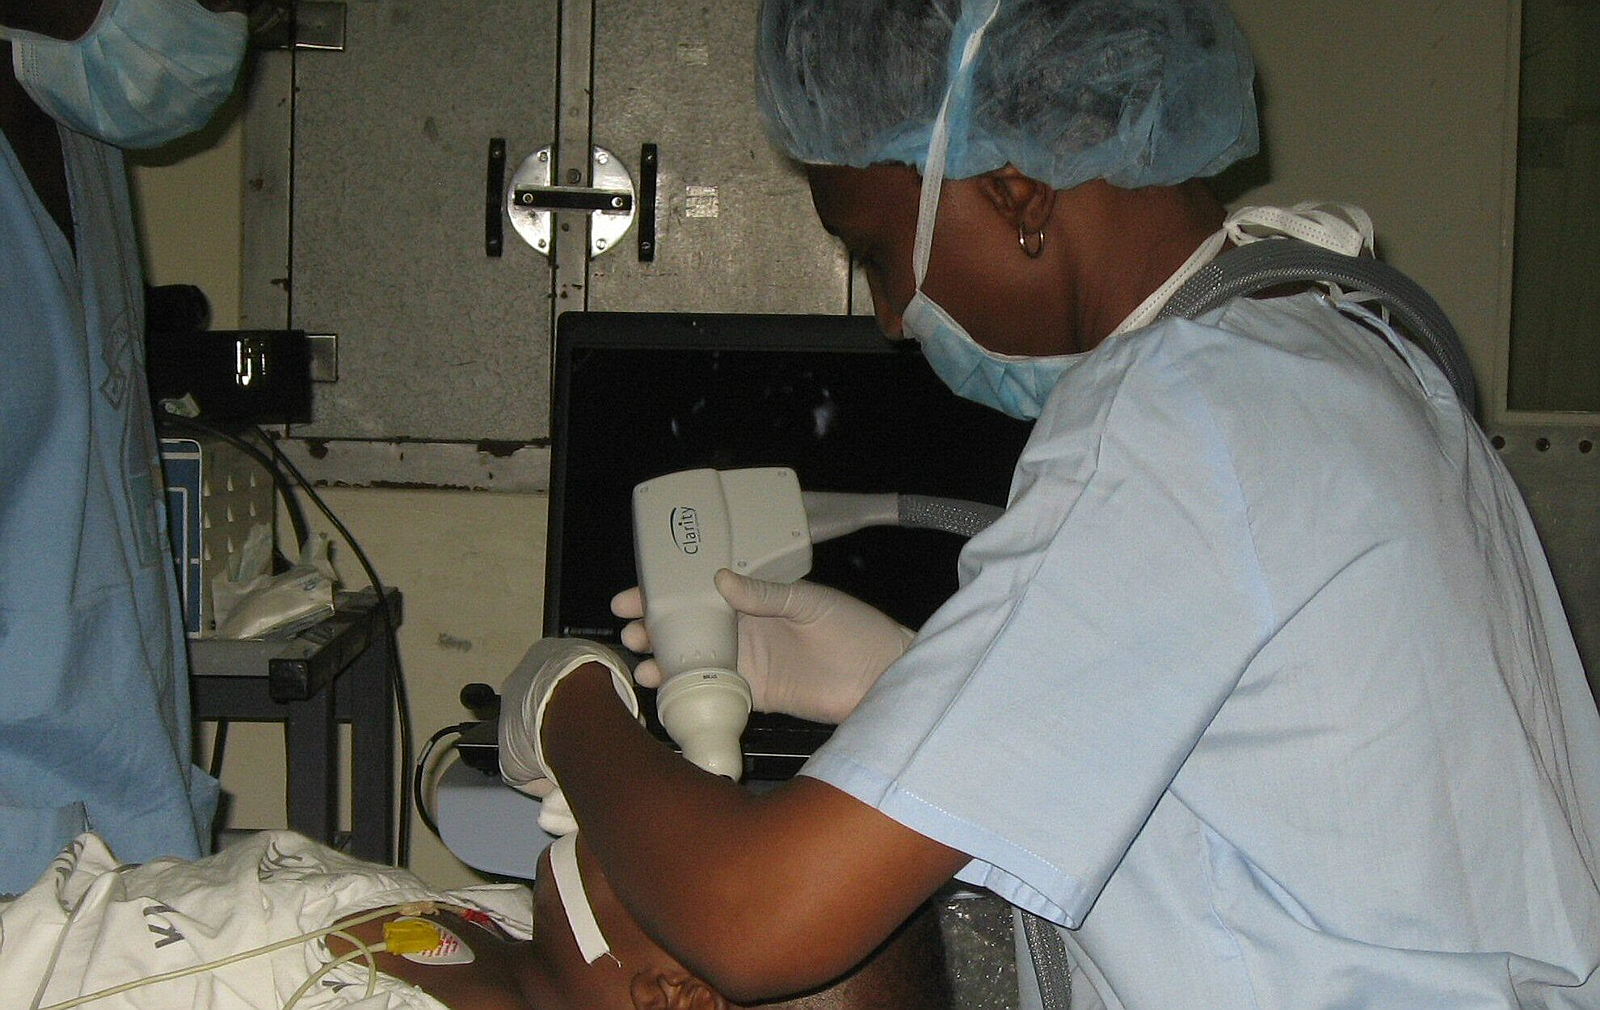 A doctor wearing scrubs, surgical cap, gloves and mask carries out an eye exam on an anaesthetised toddler. She is holding a retcam digital camera probe, and a computer sits to her side, projecting high resolution images onto the screen.